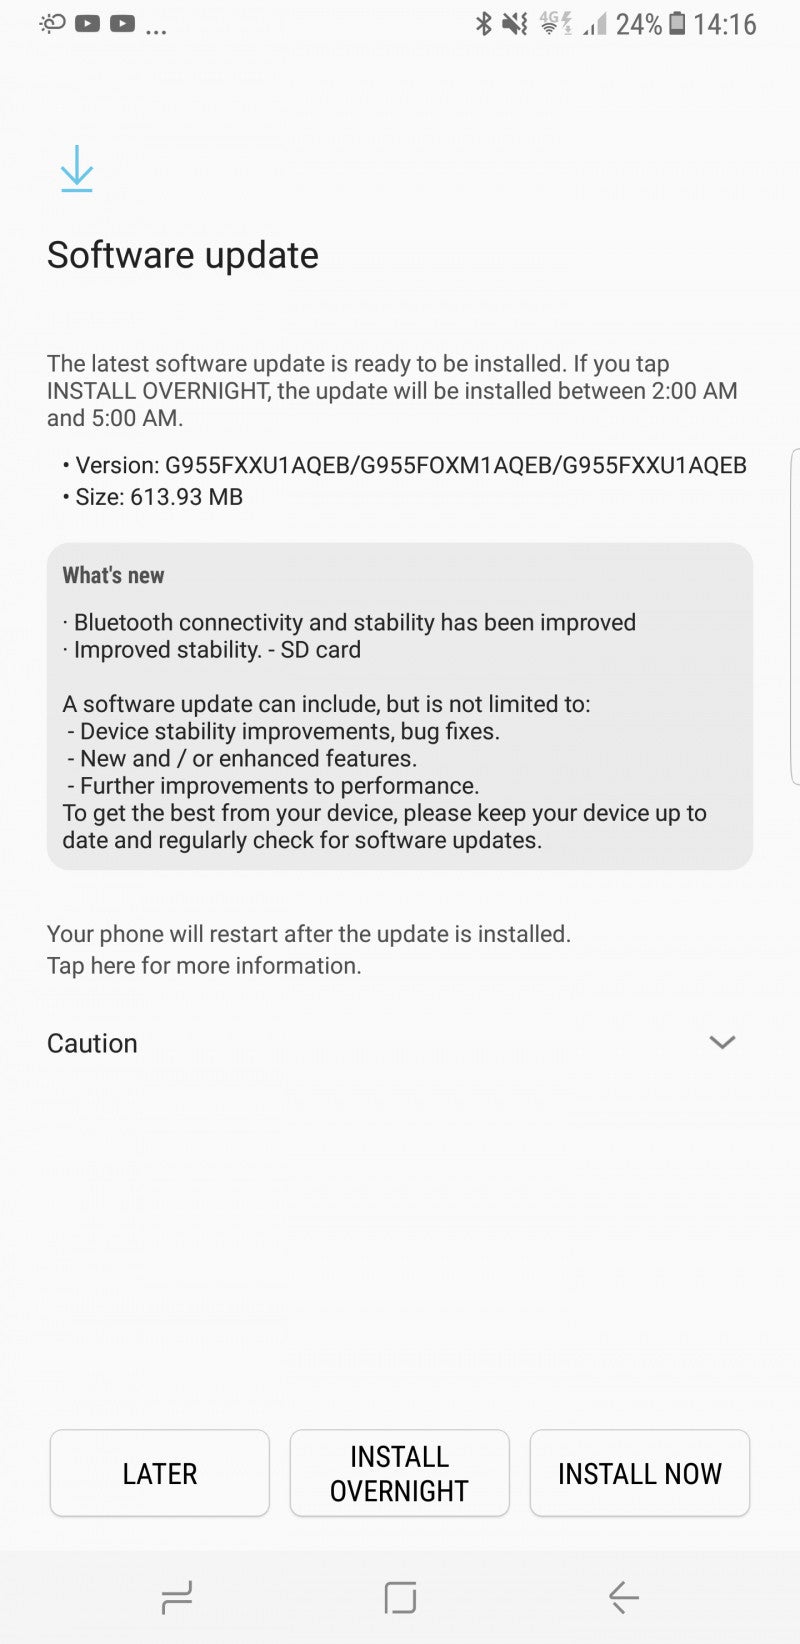 Samsung Galaxy S8/S8+ getting new update that fixes some connectivity issues